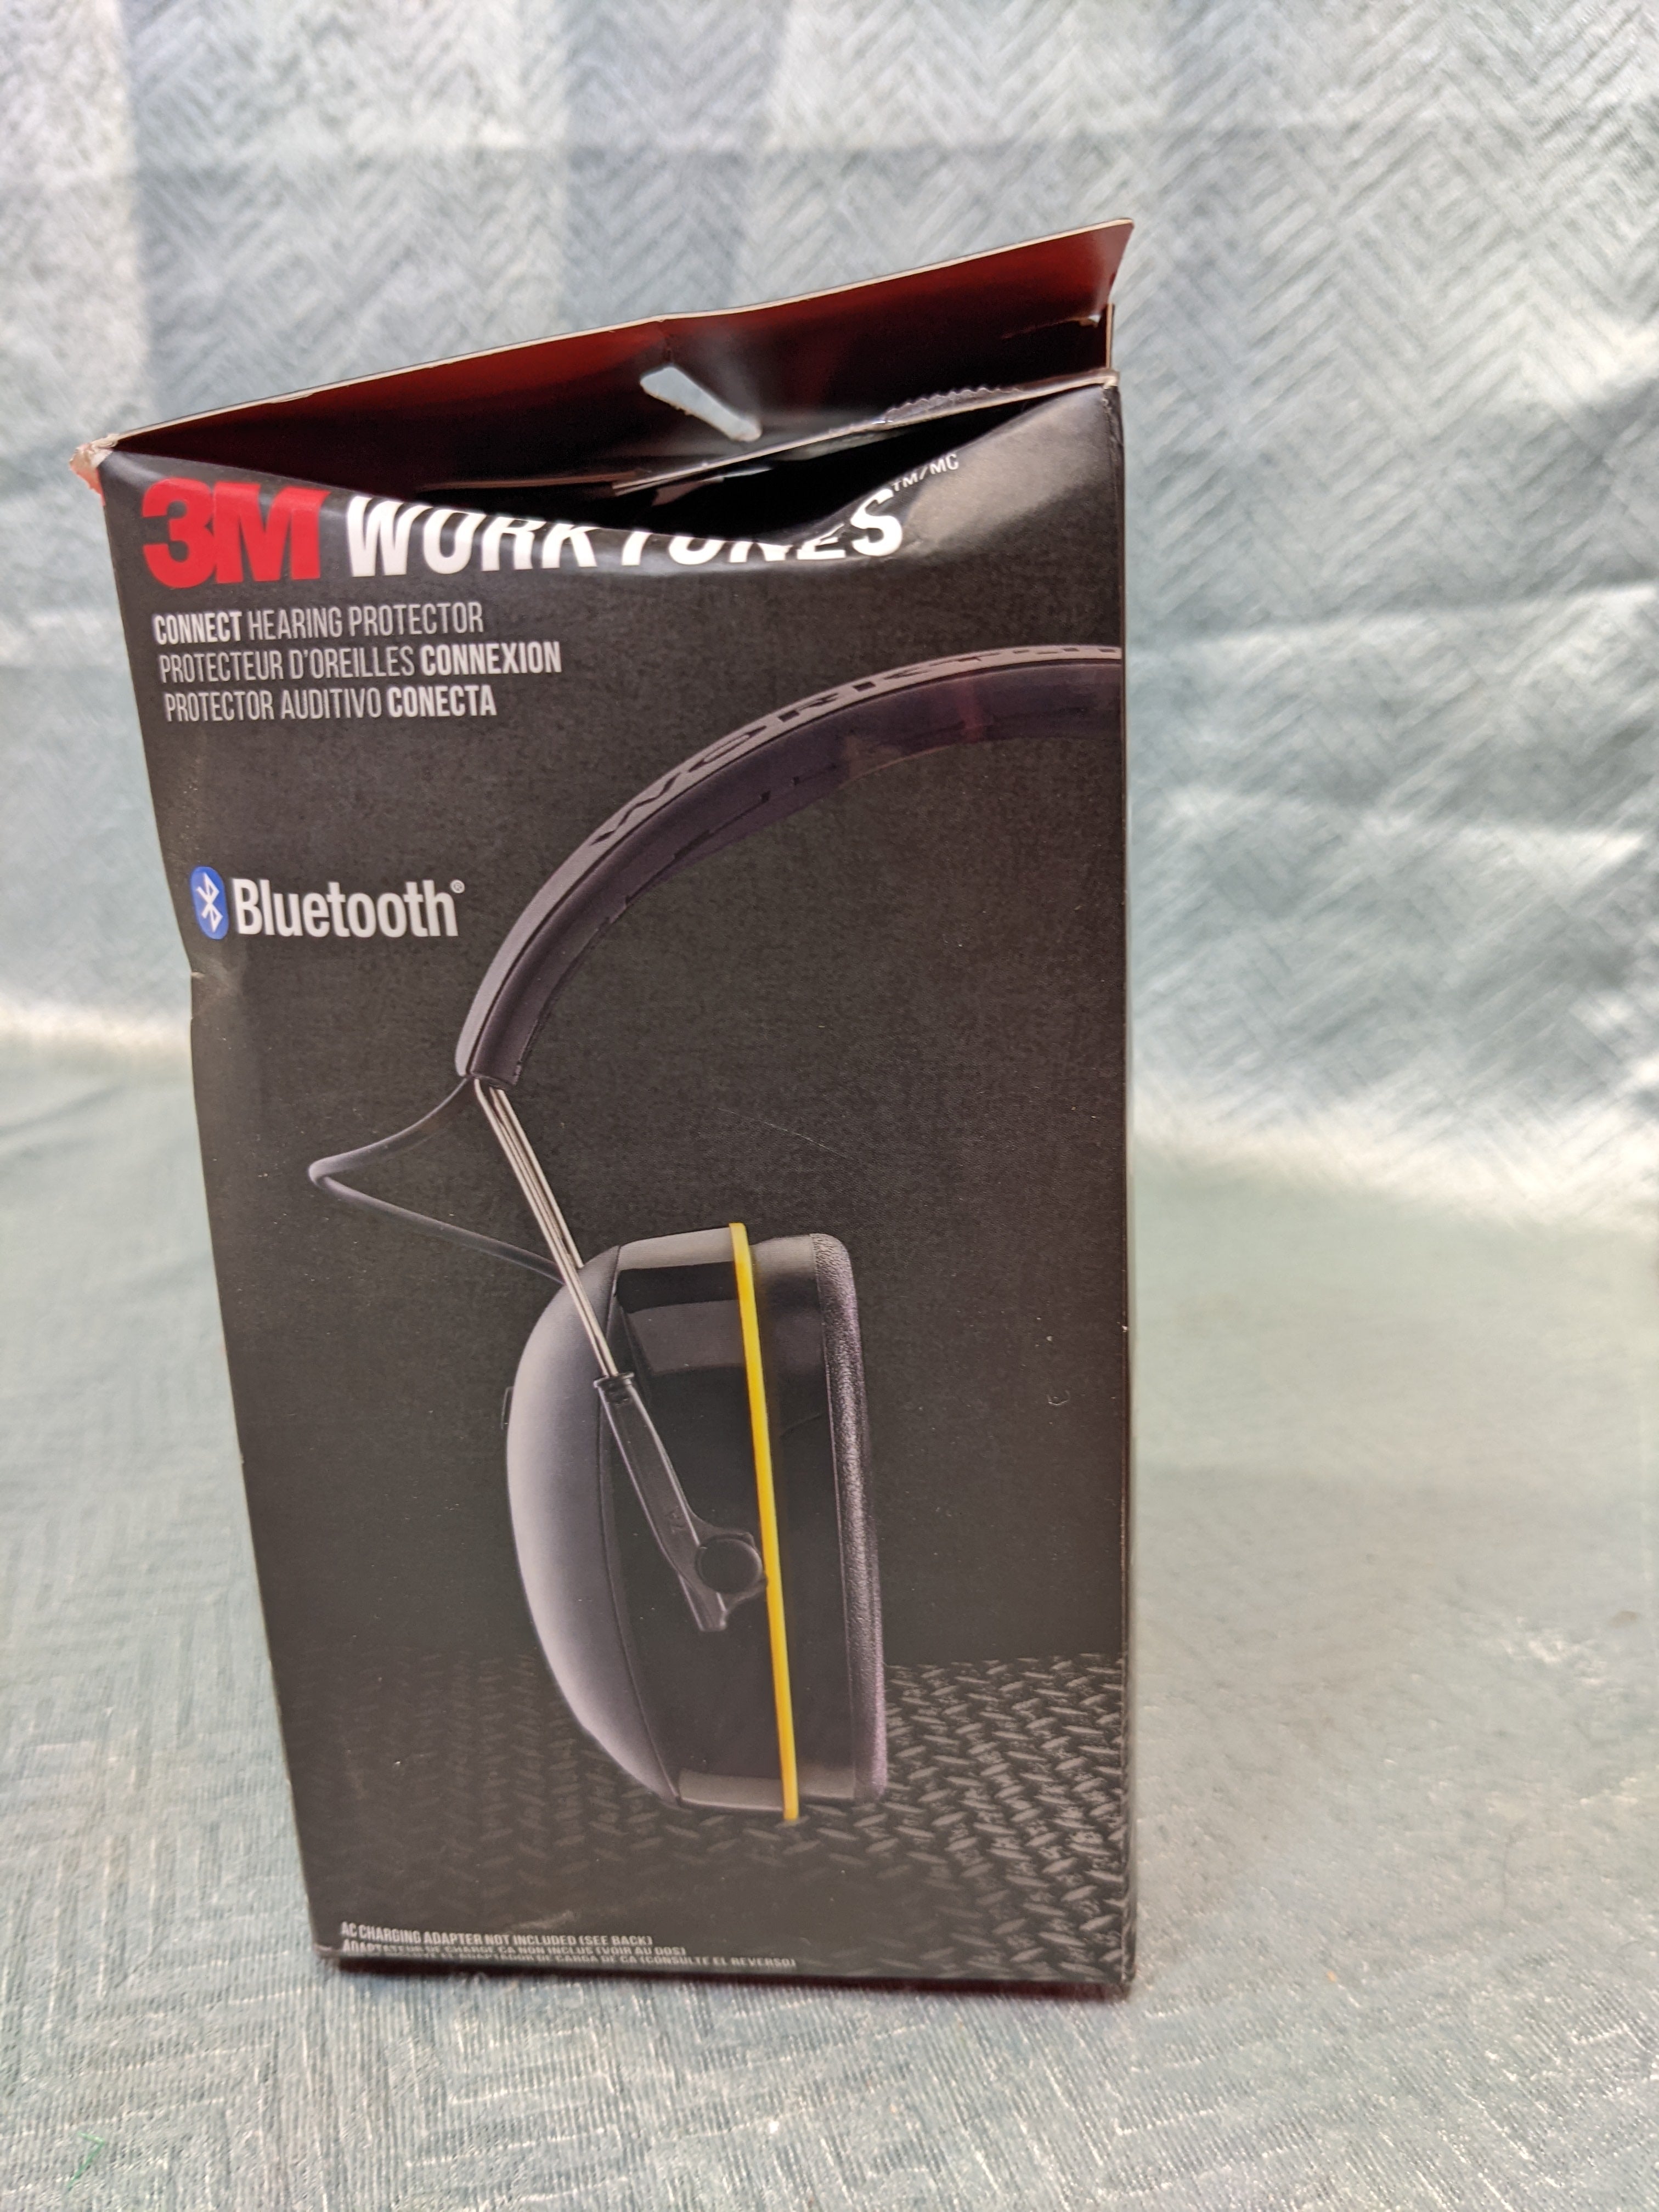 Worktunes Hearng 3M Connect Hearing Protector Bluetooth (7591889666286)